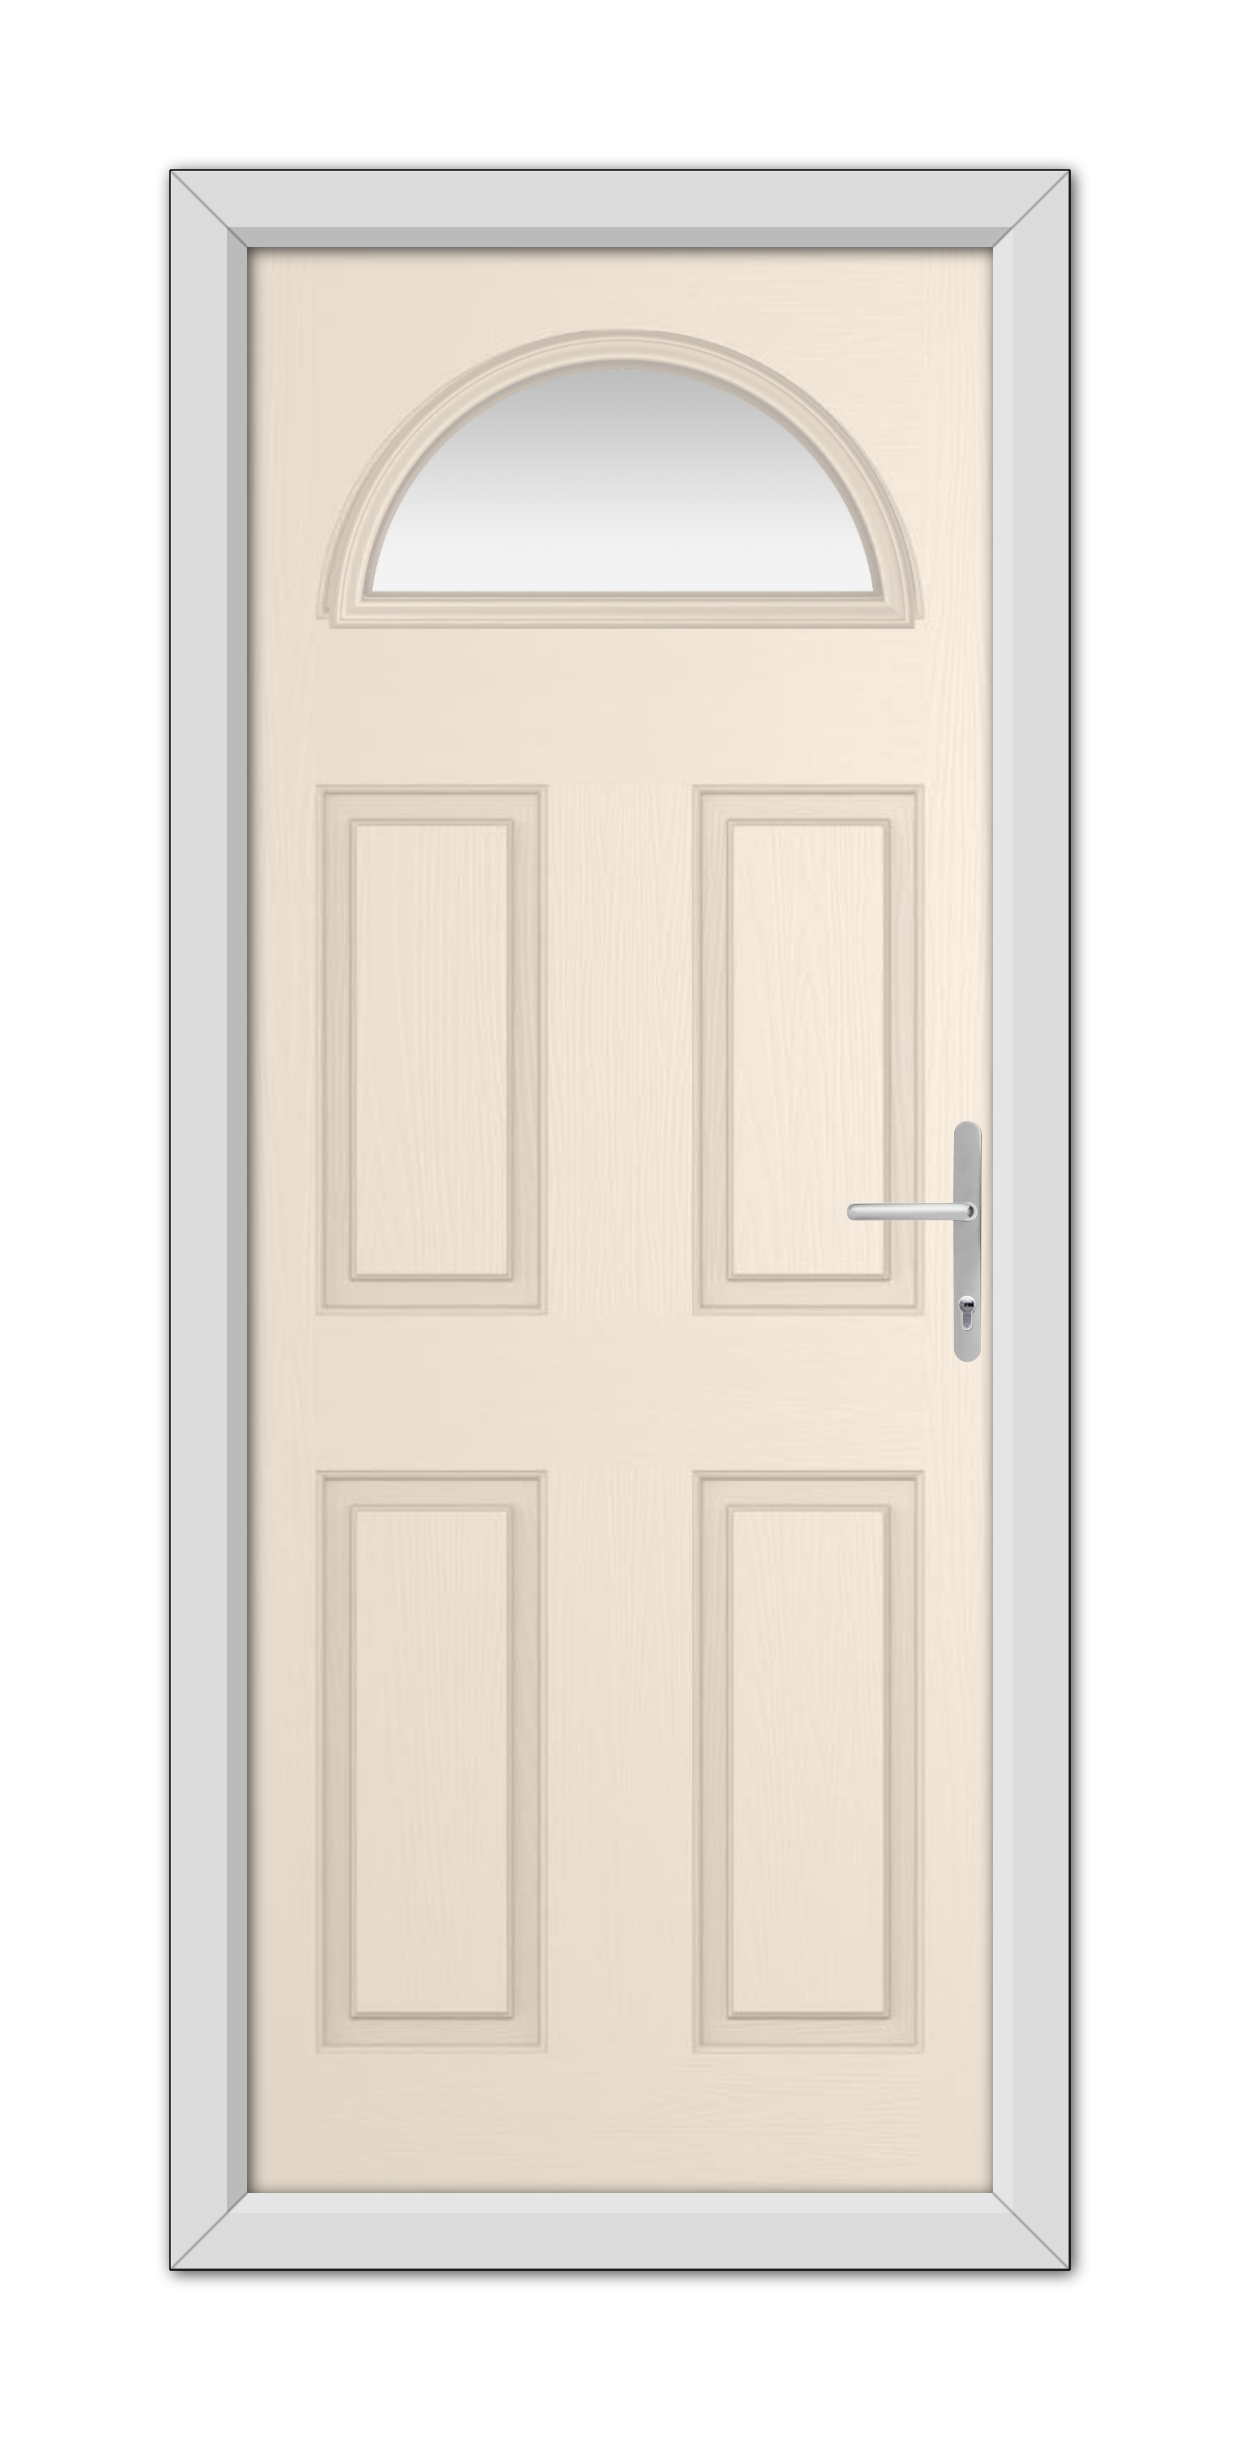 A modern Cream Seville Solid uPVC Door with six panels and an arched window at the top, set in a simple gray frame with a metallic handle on the right.